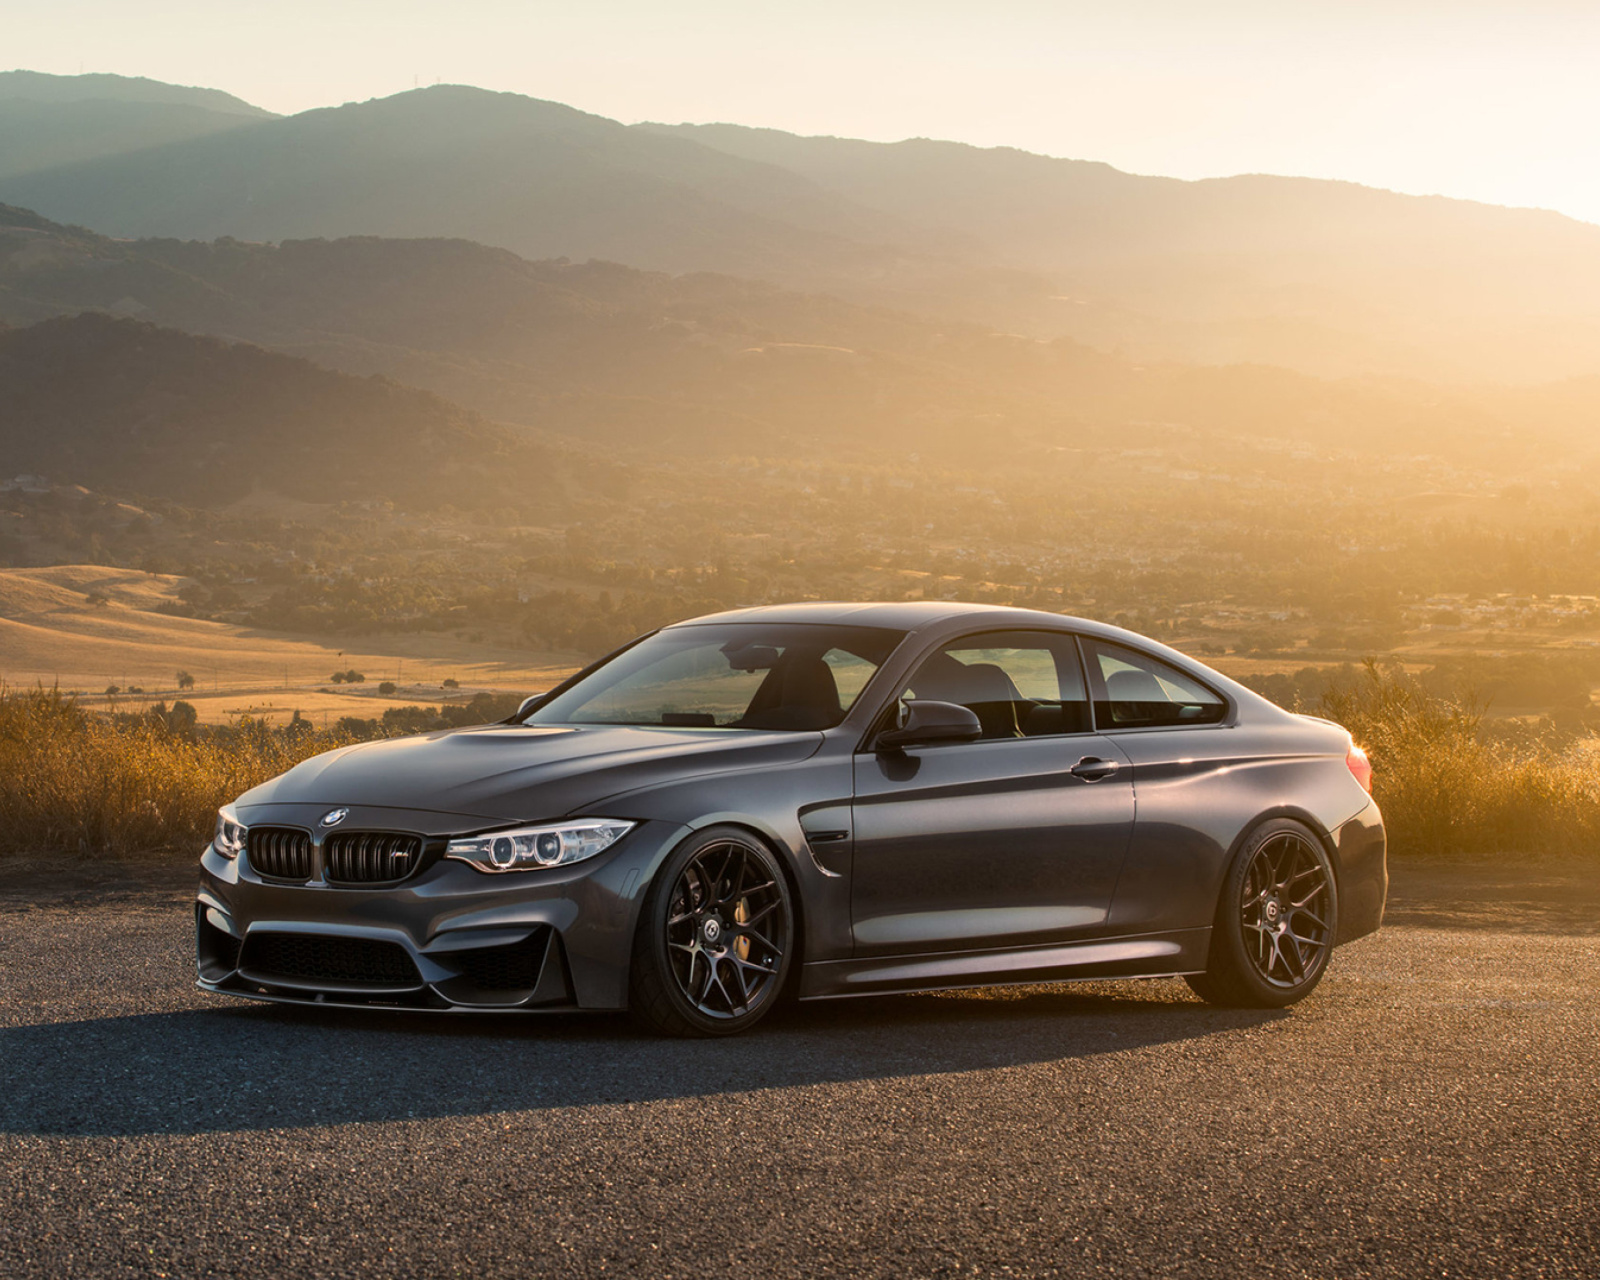 BMW 430i Coupe wallpaper 1600x1280